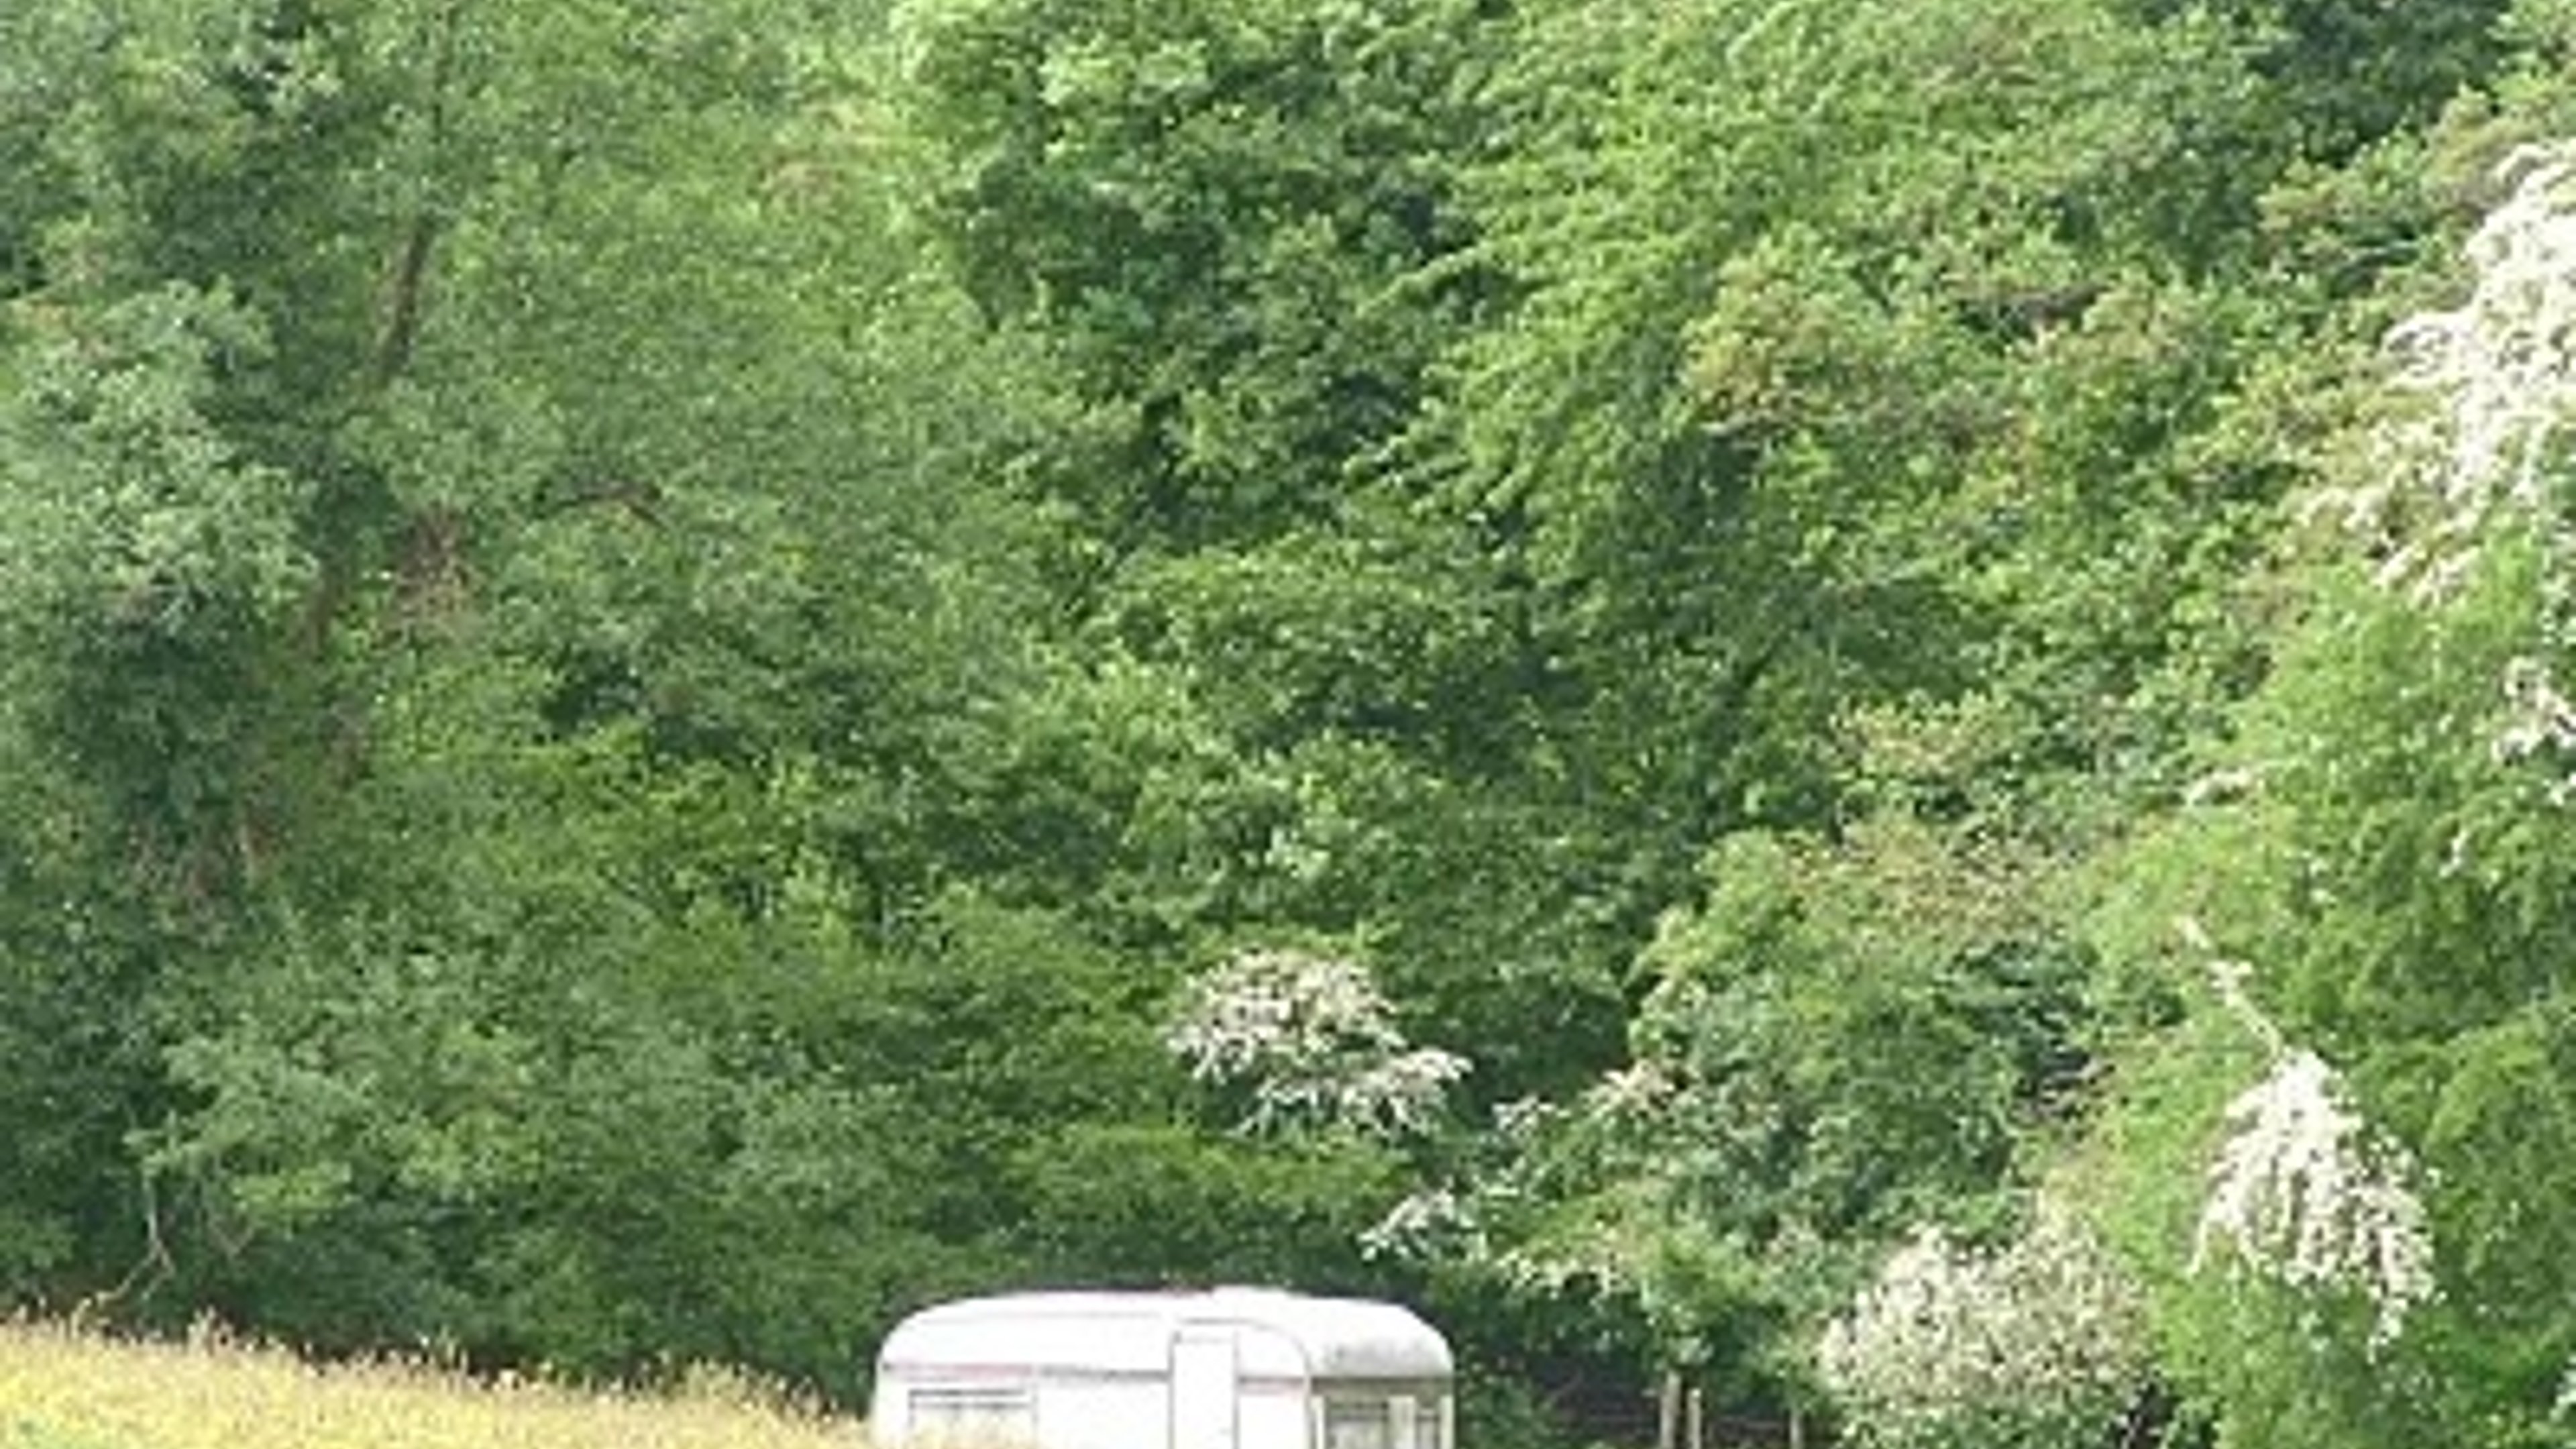 Meredith Farm Camping, Herefordshire